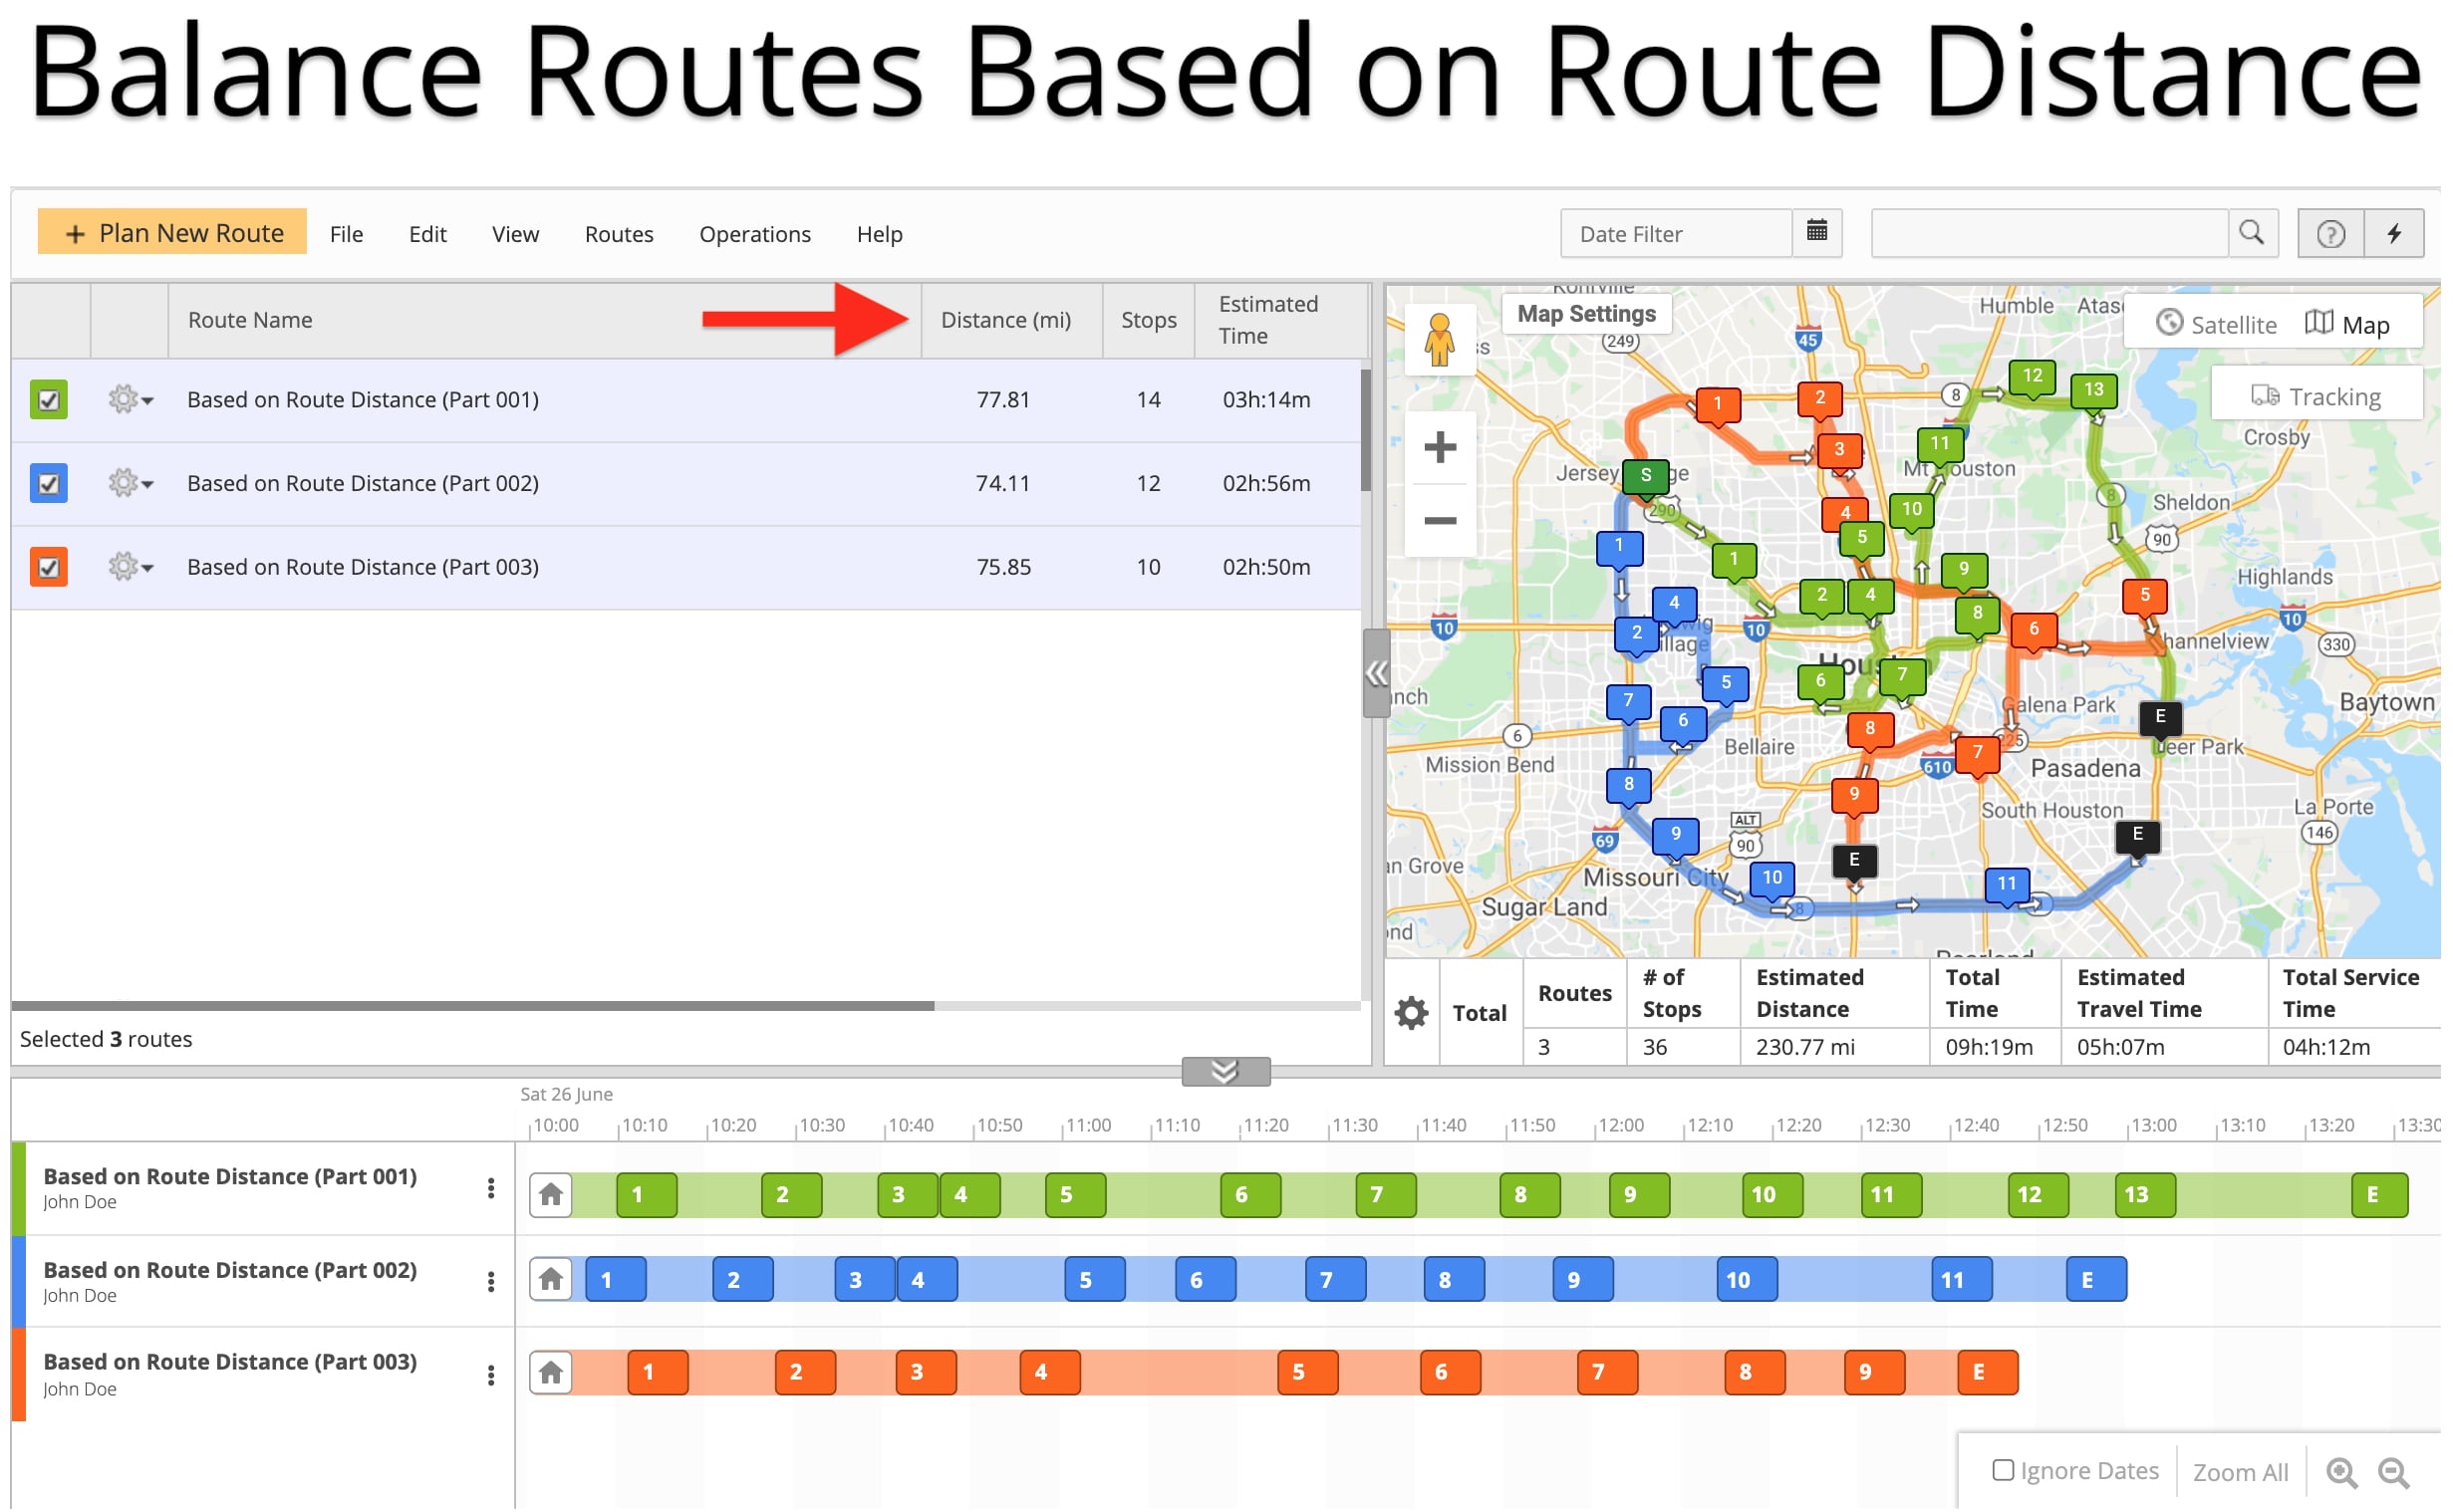 Route stops distribution based on route distance plans routes with almost equal distances.